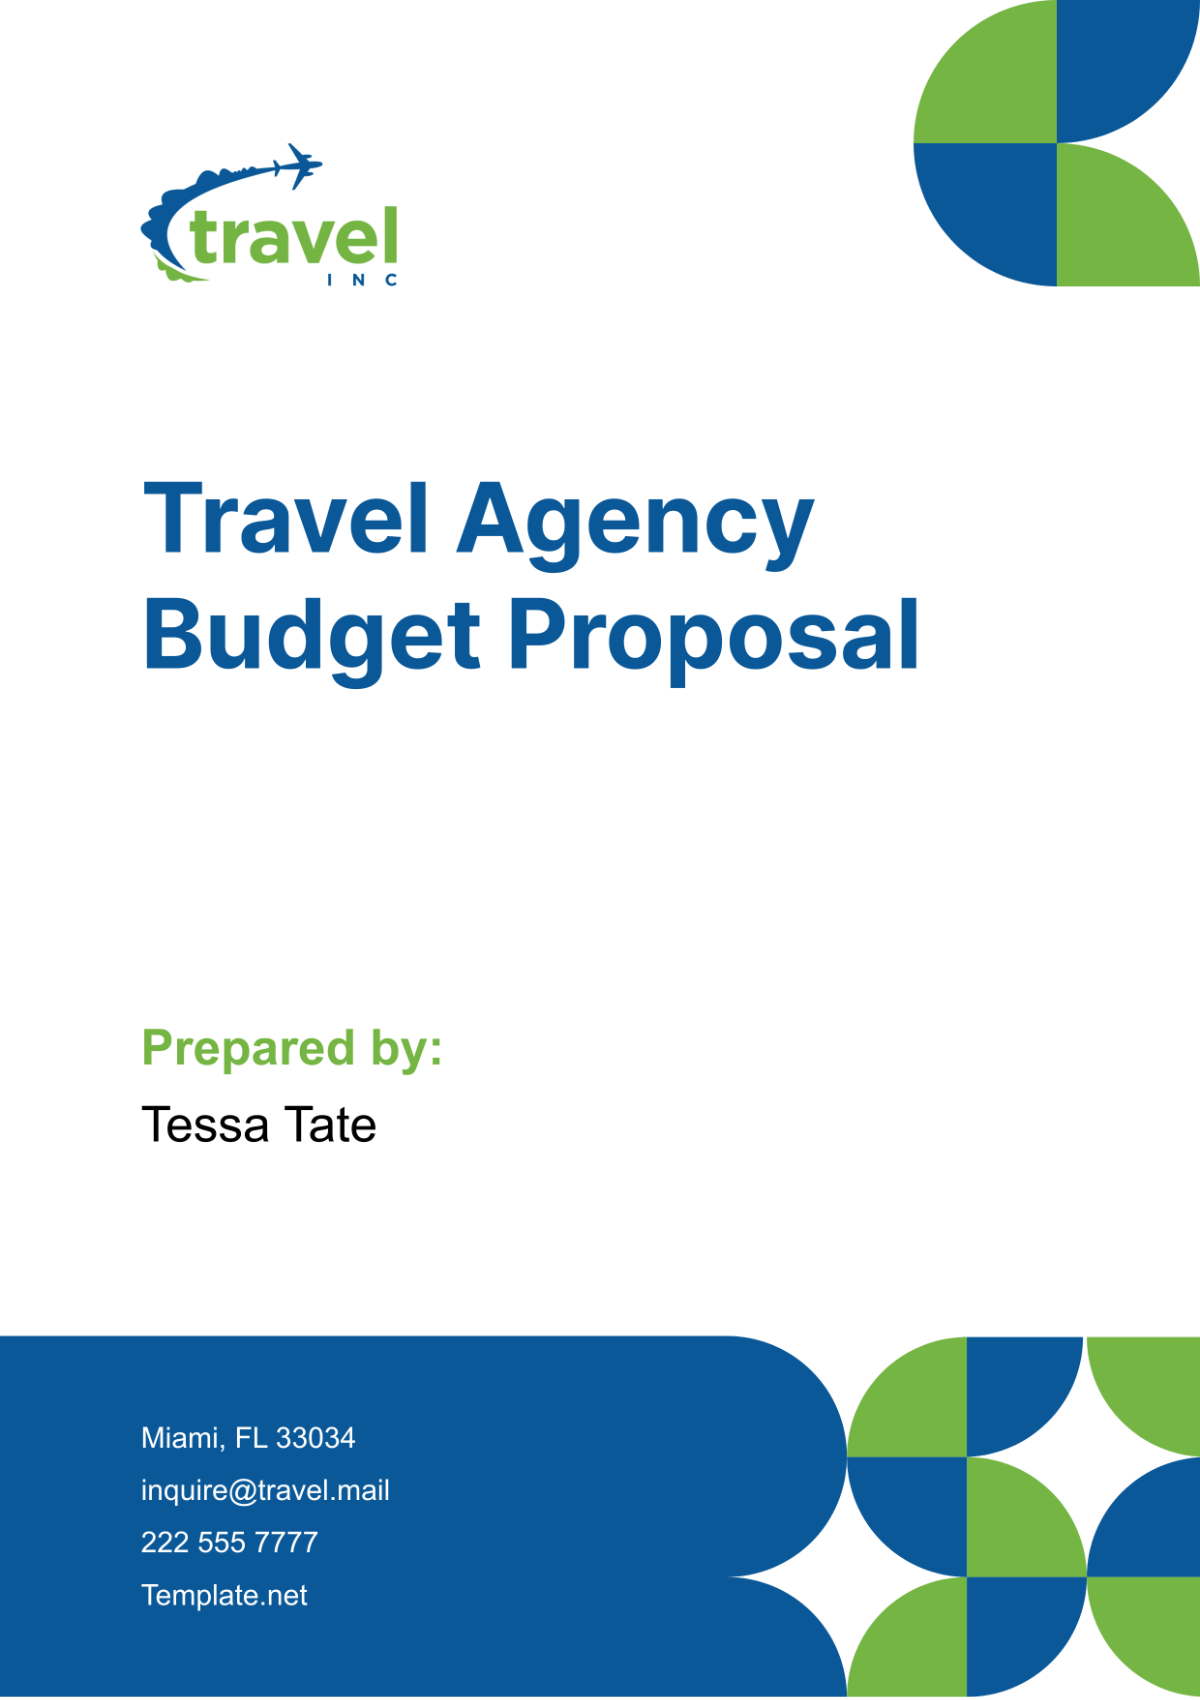 Travel Agency Budget Proposal Template